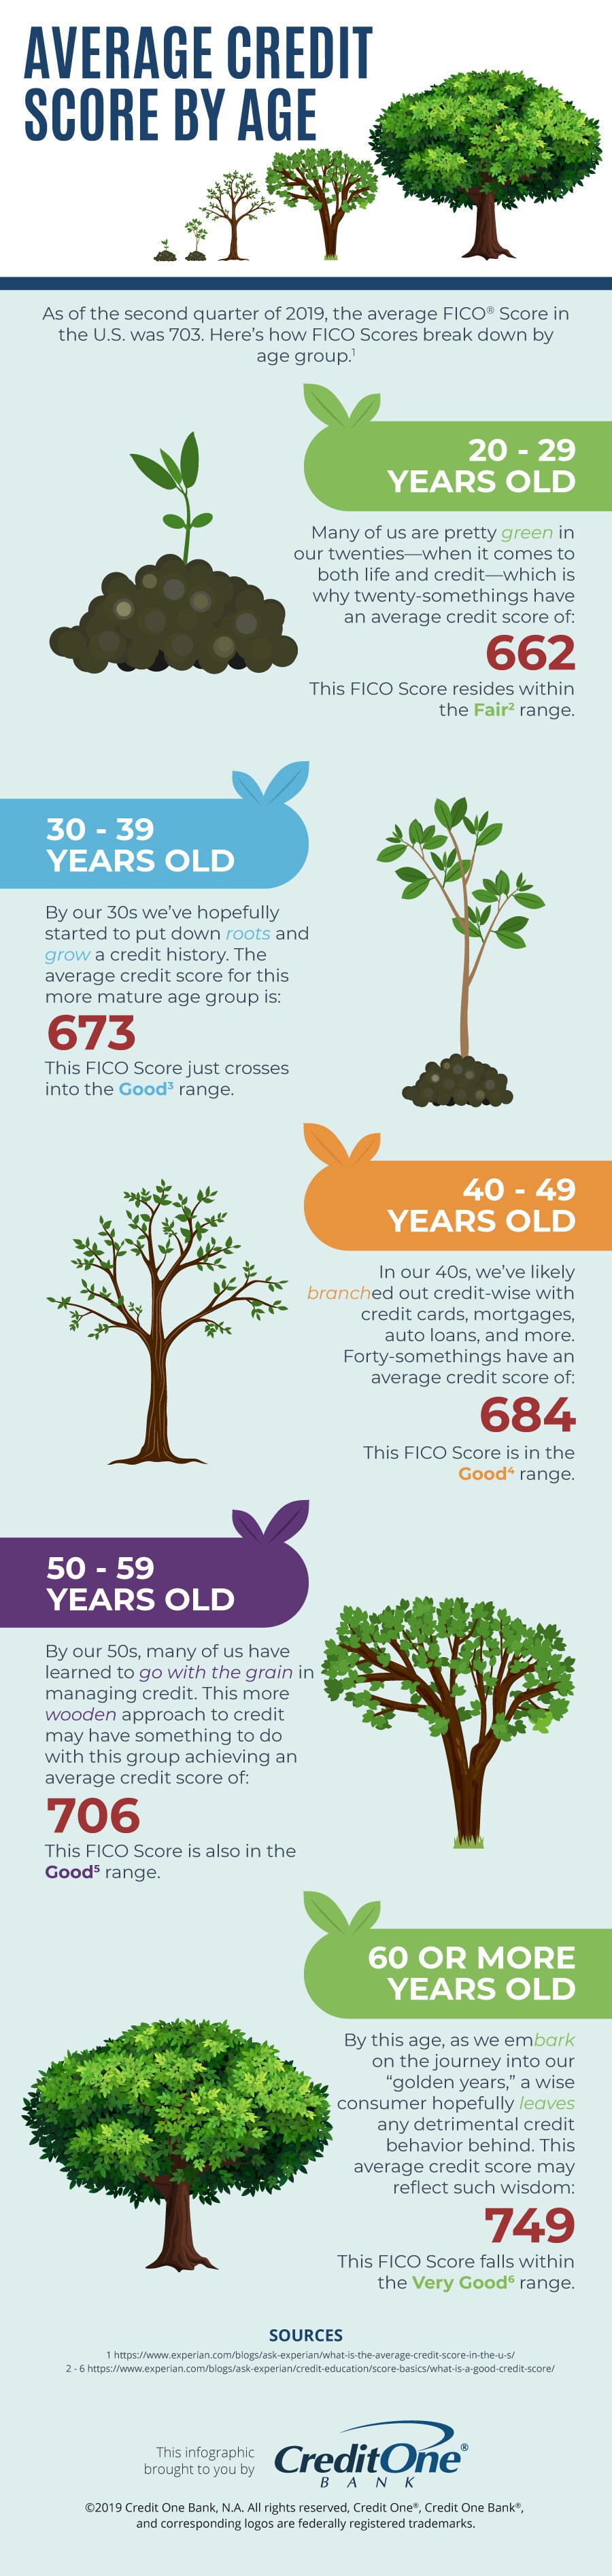 Infographic on average credit score by age